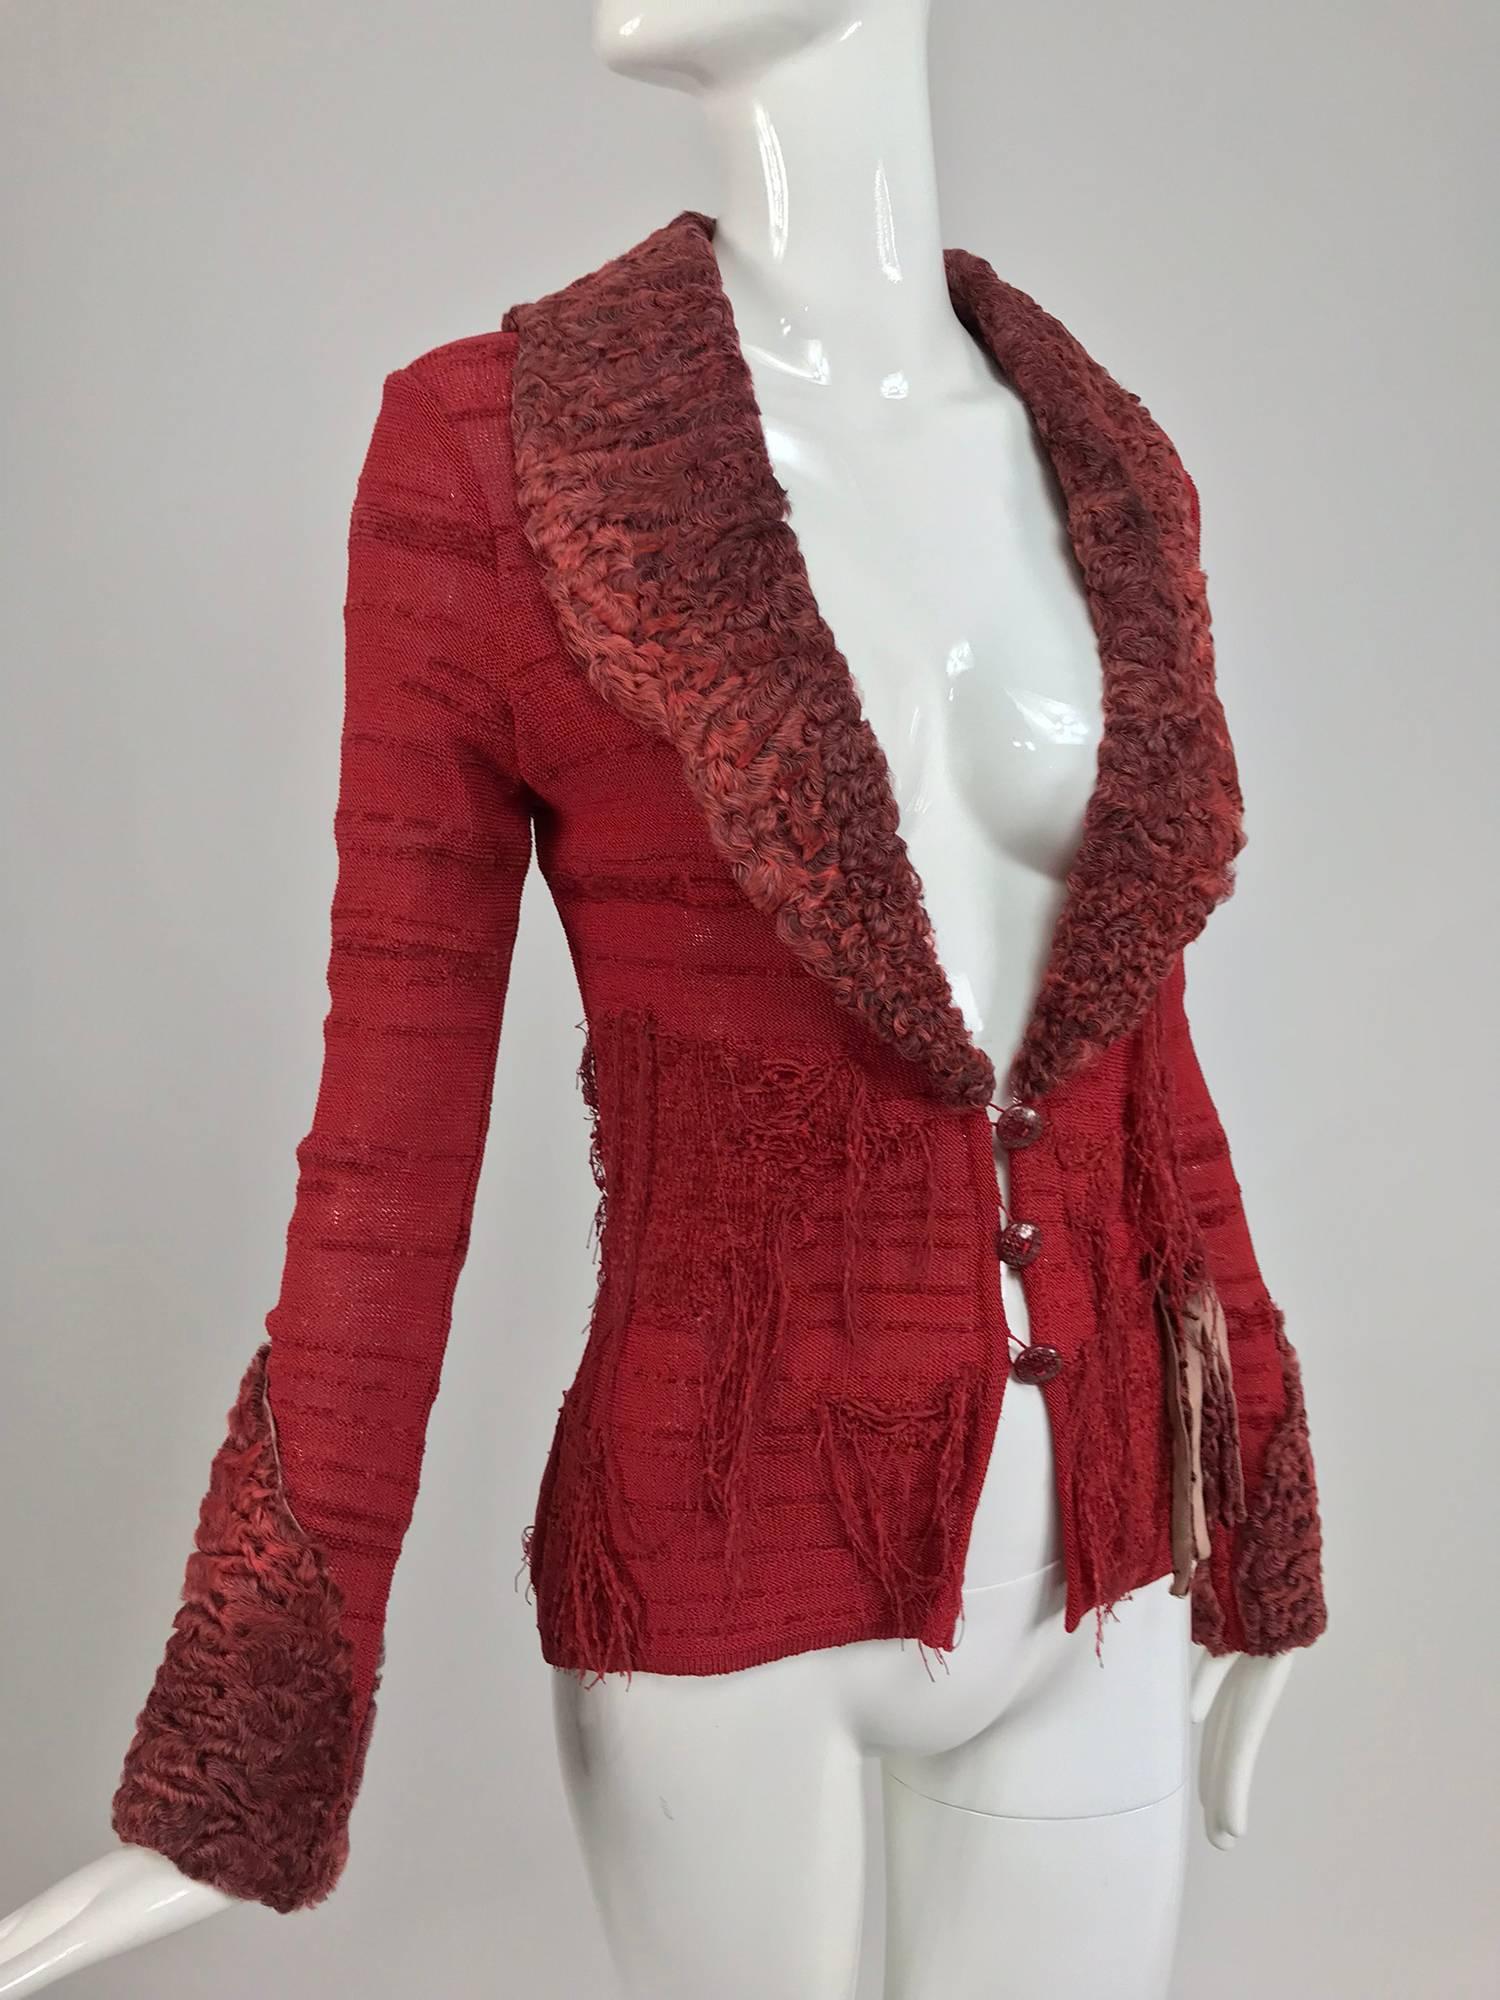 Christian LaCroix brick red sweater with dyed lamb fur trim...Cardigan sweater with dyed red lamb fur collar cuffs and appliqued fringe...This sweater is knitted in an irregular pattern using rayon and velvety synthetic yarns to create a unique